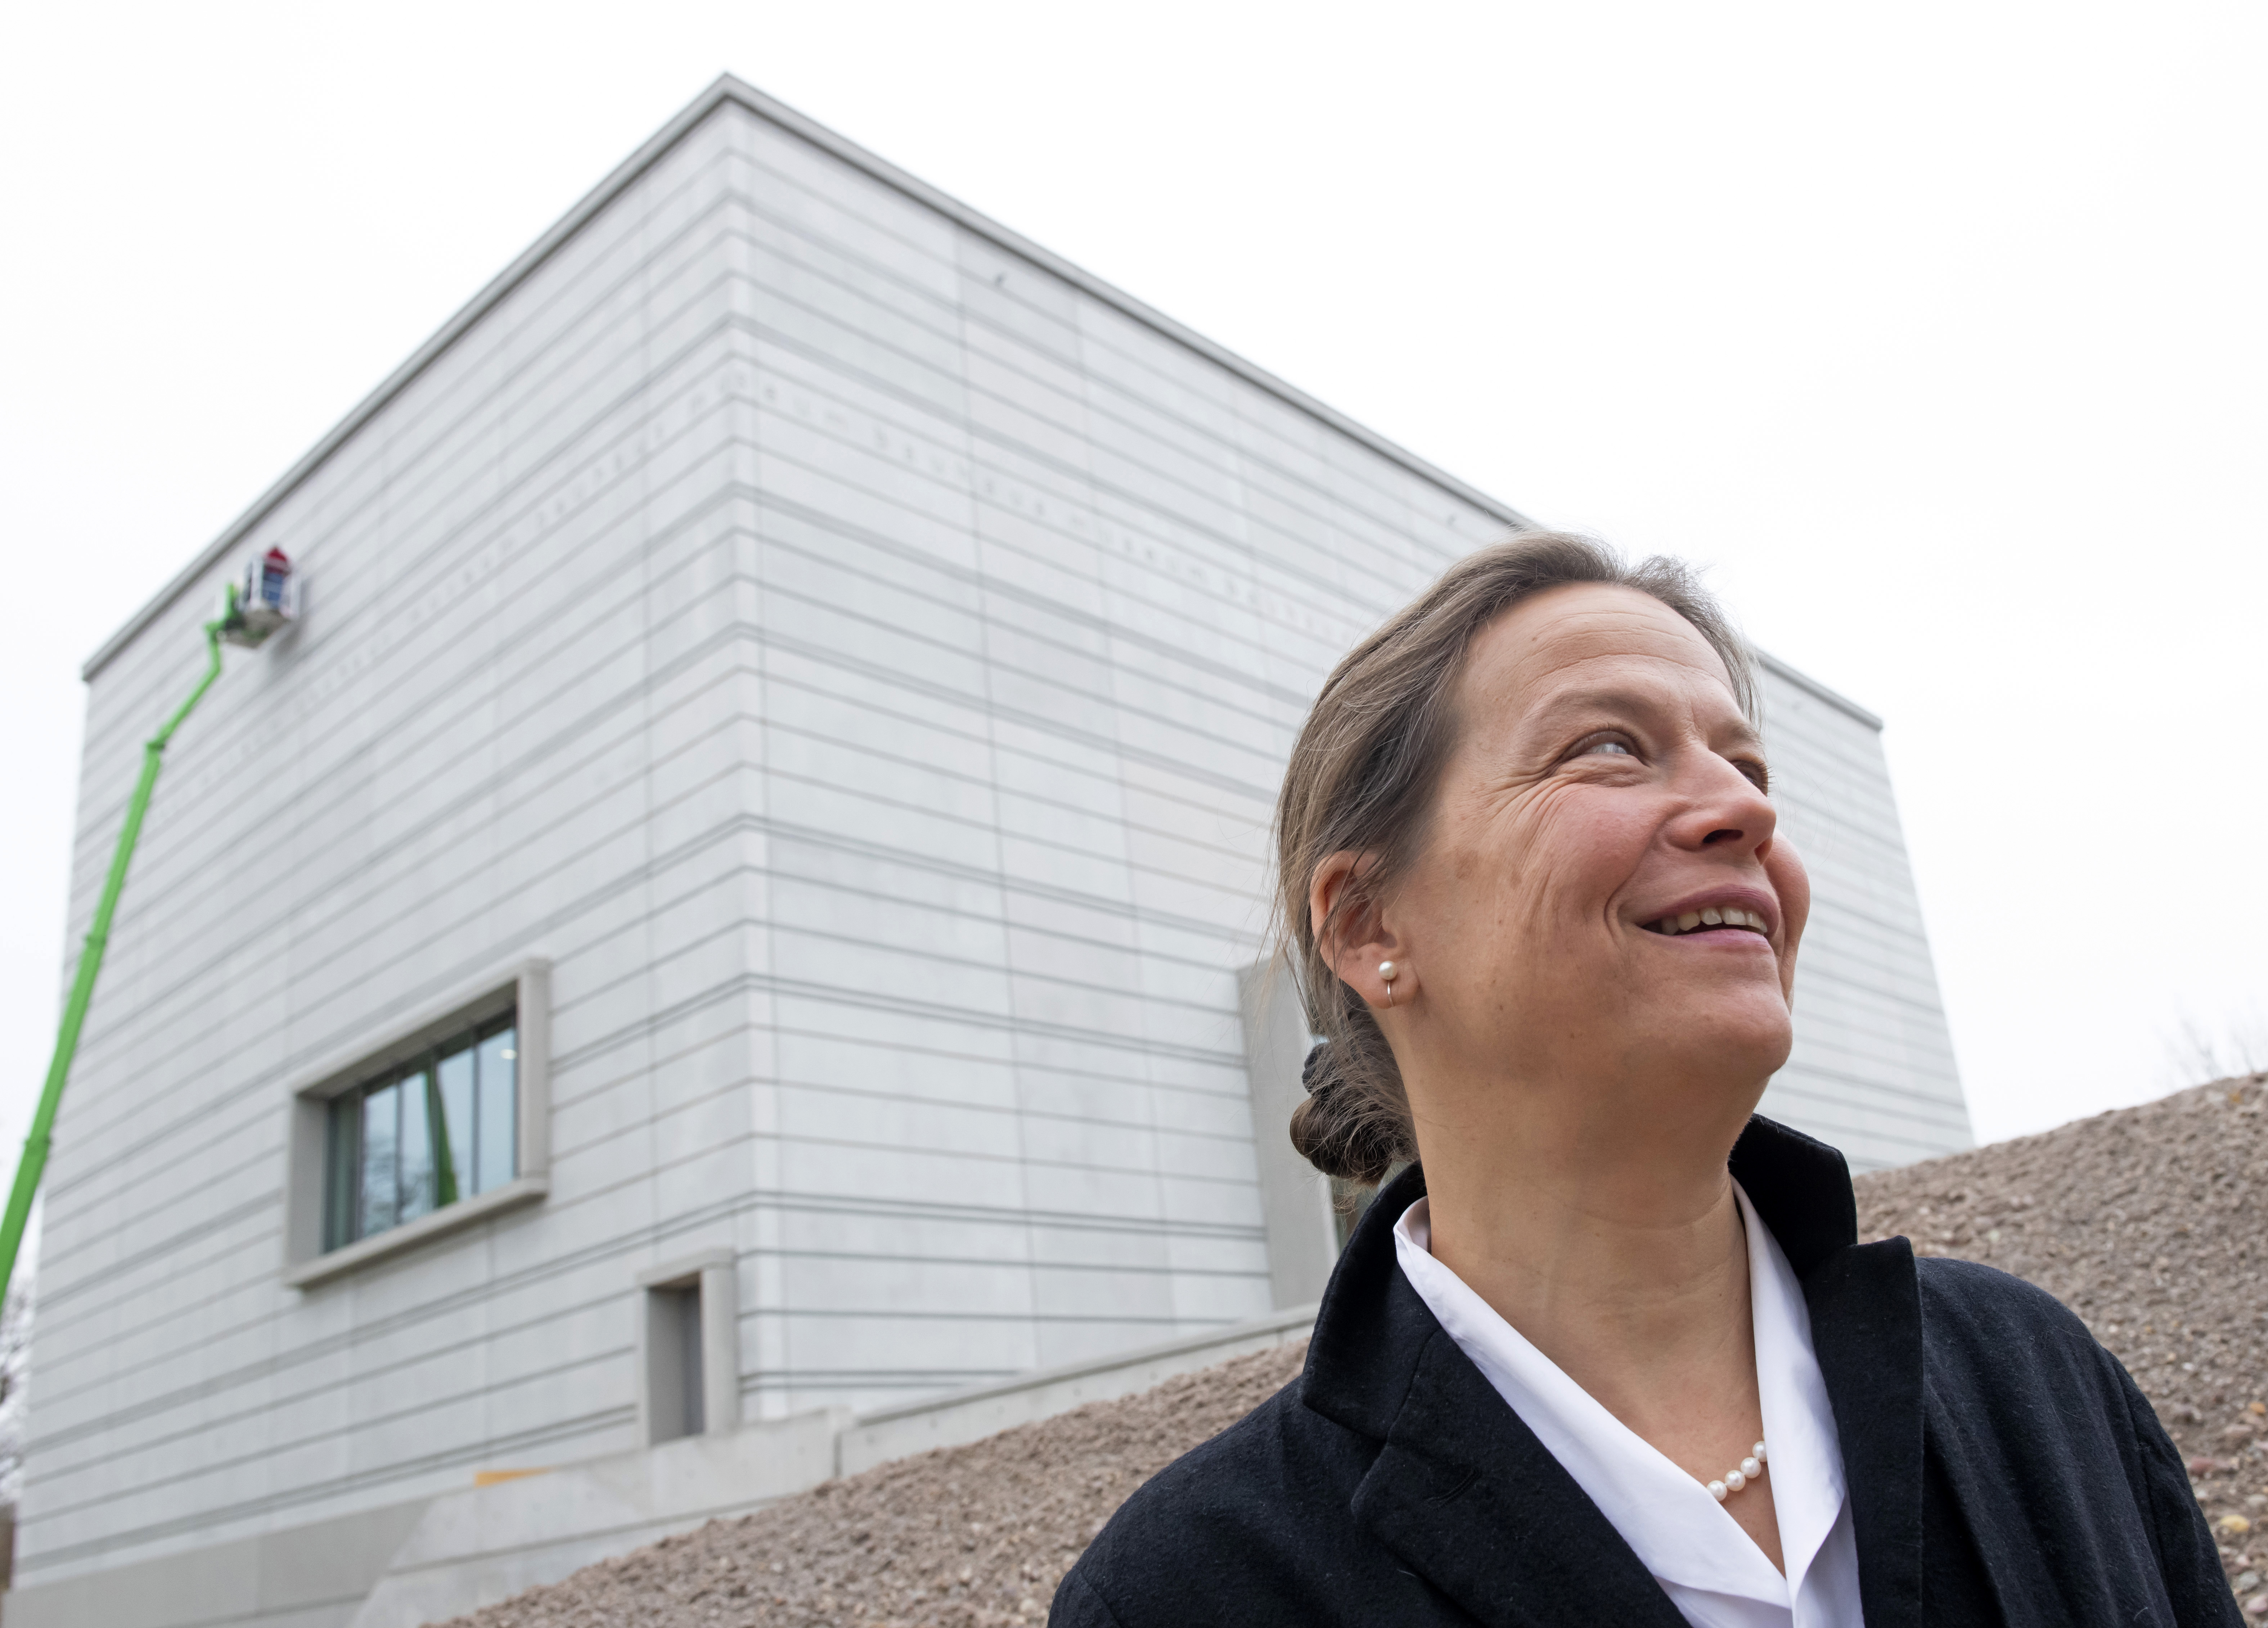 Architect Heike Hanada stands in front of the new Bauhaus Museum of the 'Klassik Stiftung Weimar' (Classic Foundation Weimar) in Weimar, Germany, Thursday, April 4, 2019. The museum designed by Berlin-based architect Heike Hanada will focus on the early Bauhaus that was founded in Weimar in 1919 and stayed there until 1925. The official opening of the new Bauhaus Museums will take place on Friday, April 5, 2019. (AP Photo/Jens Meyer)